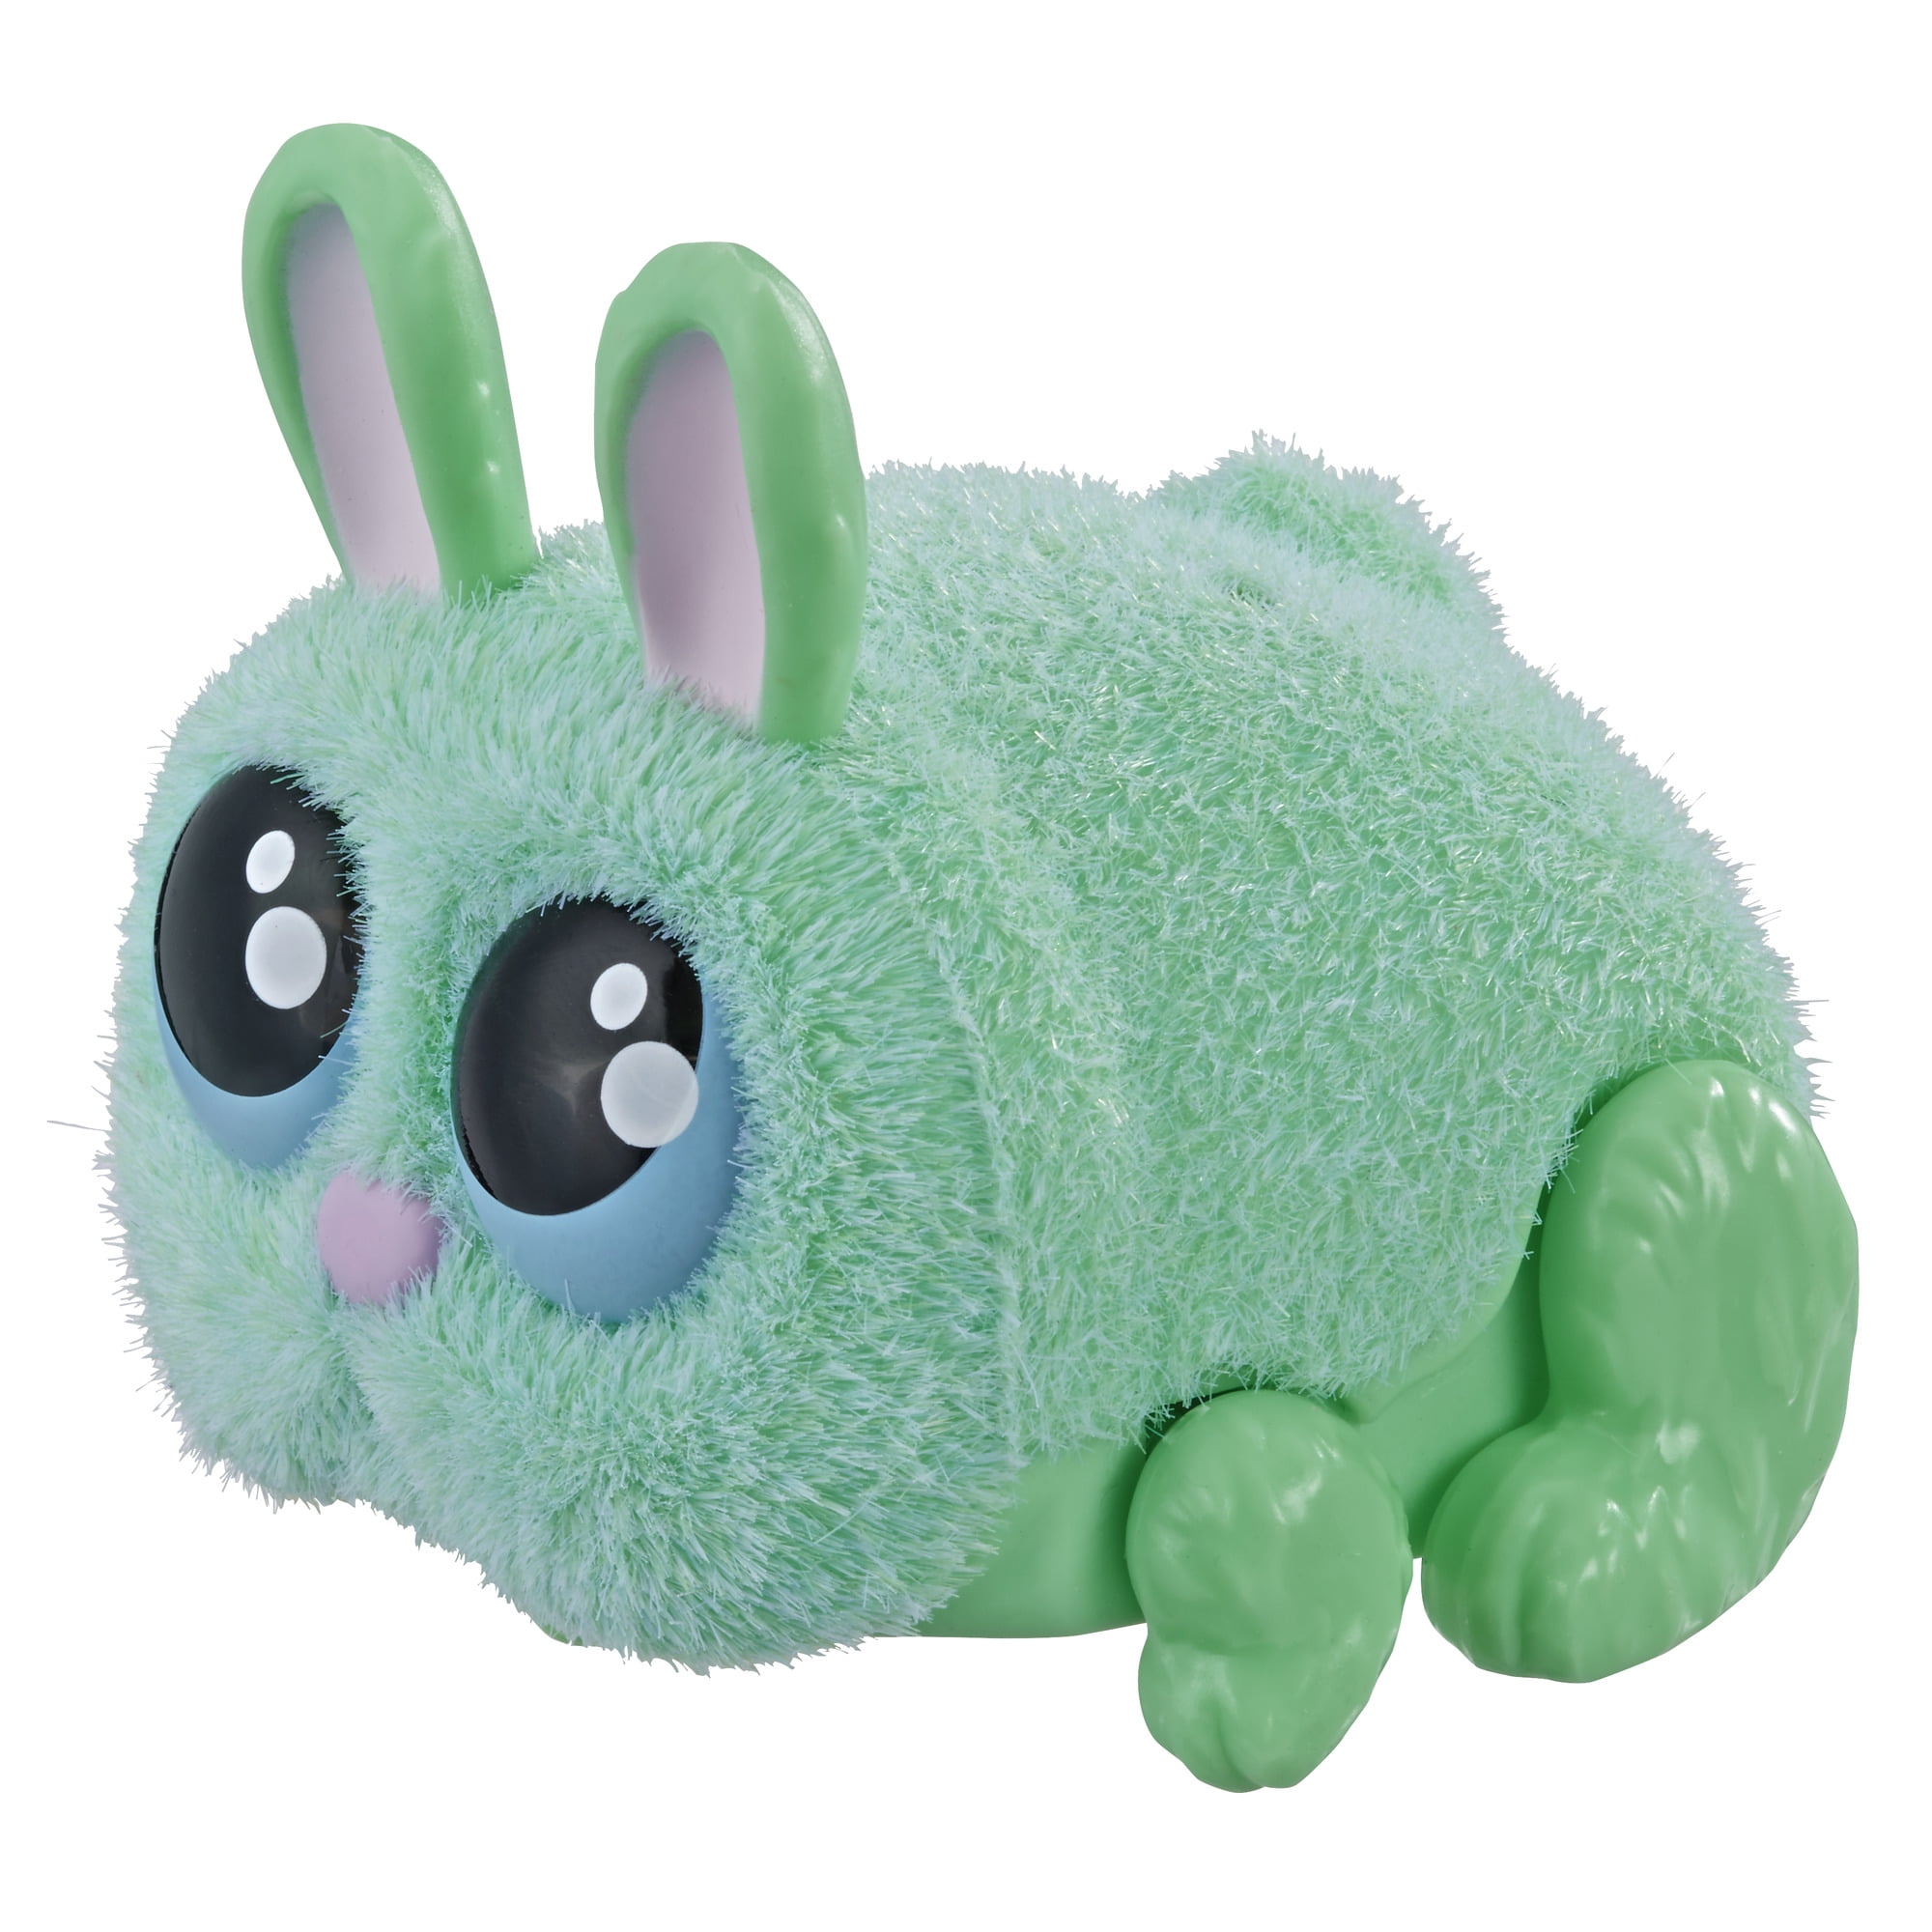 Hasbro Yellies Wiggly Wriggles Voice-activated Spider Pet Ages 5 and up for sale online